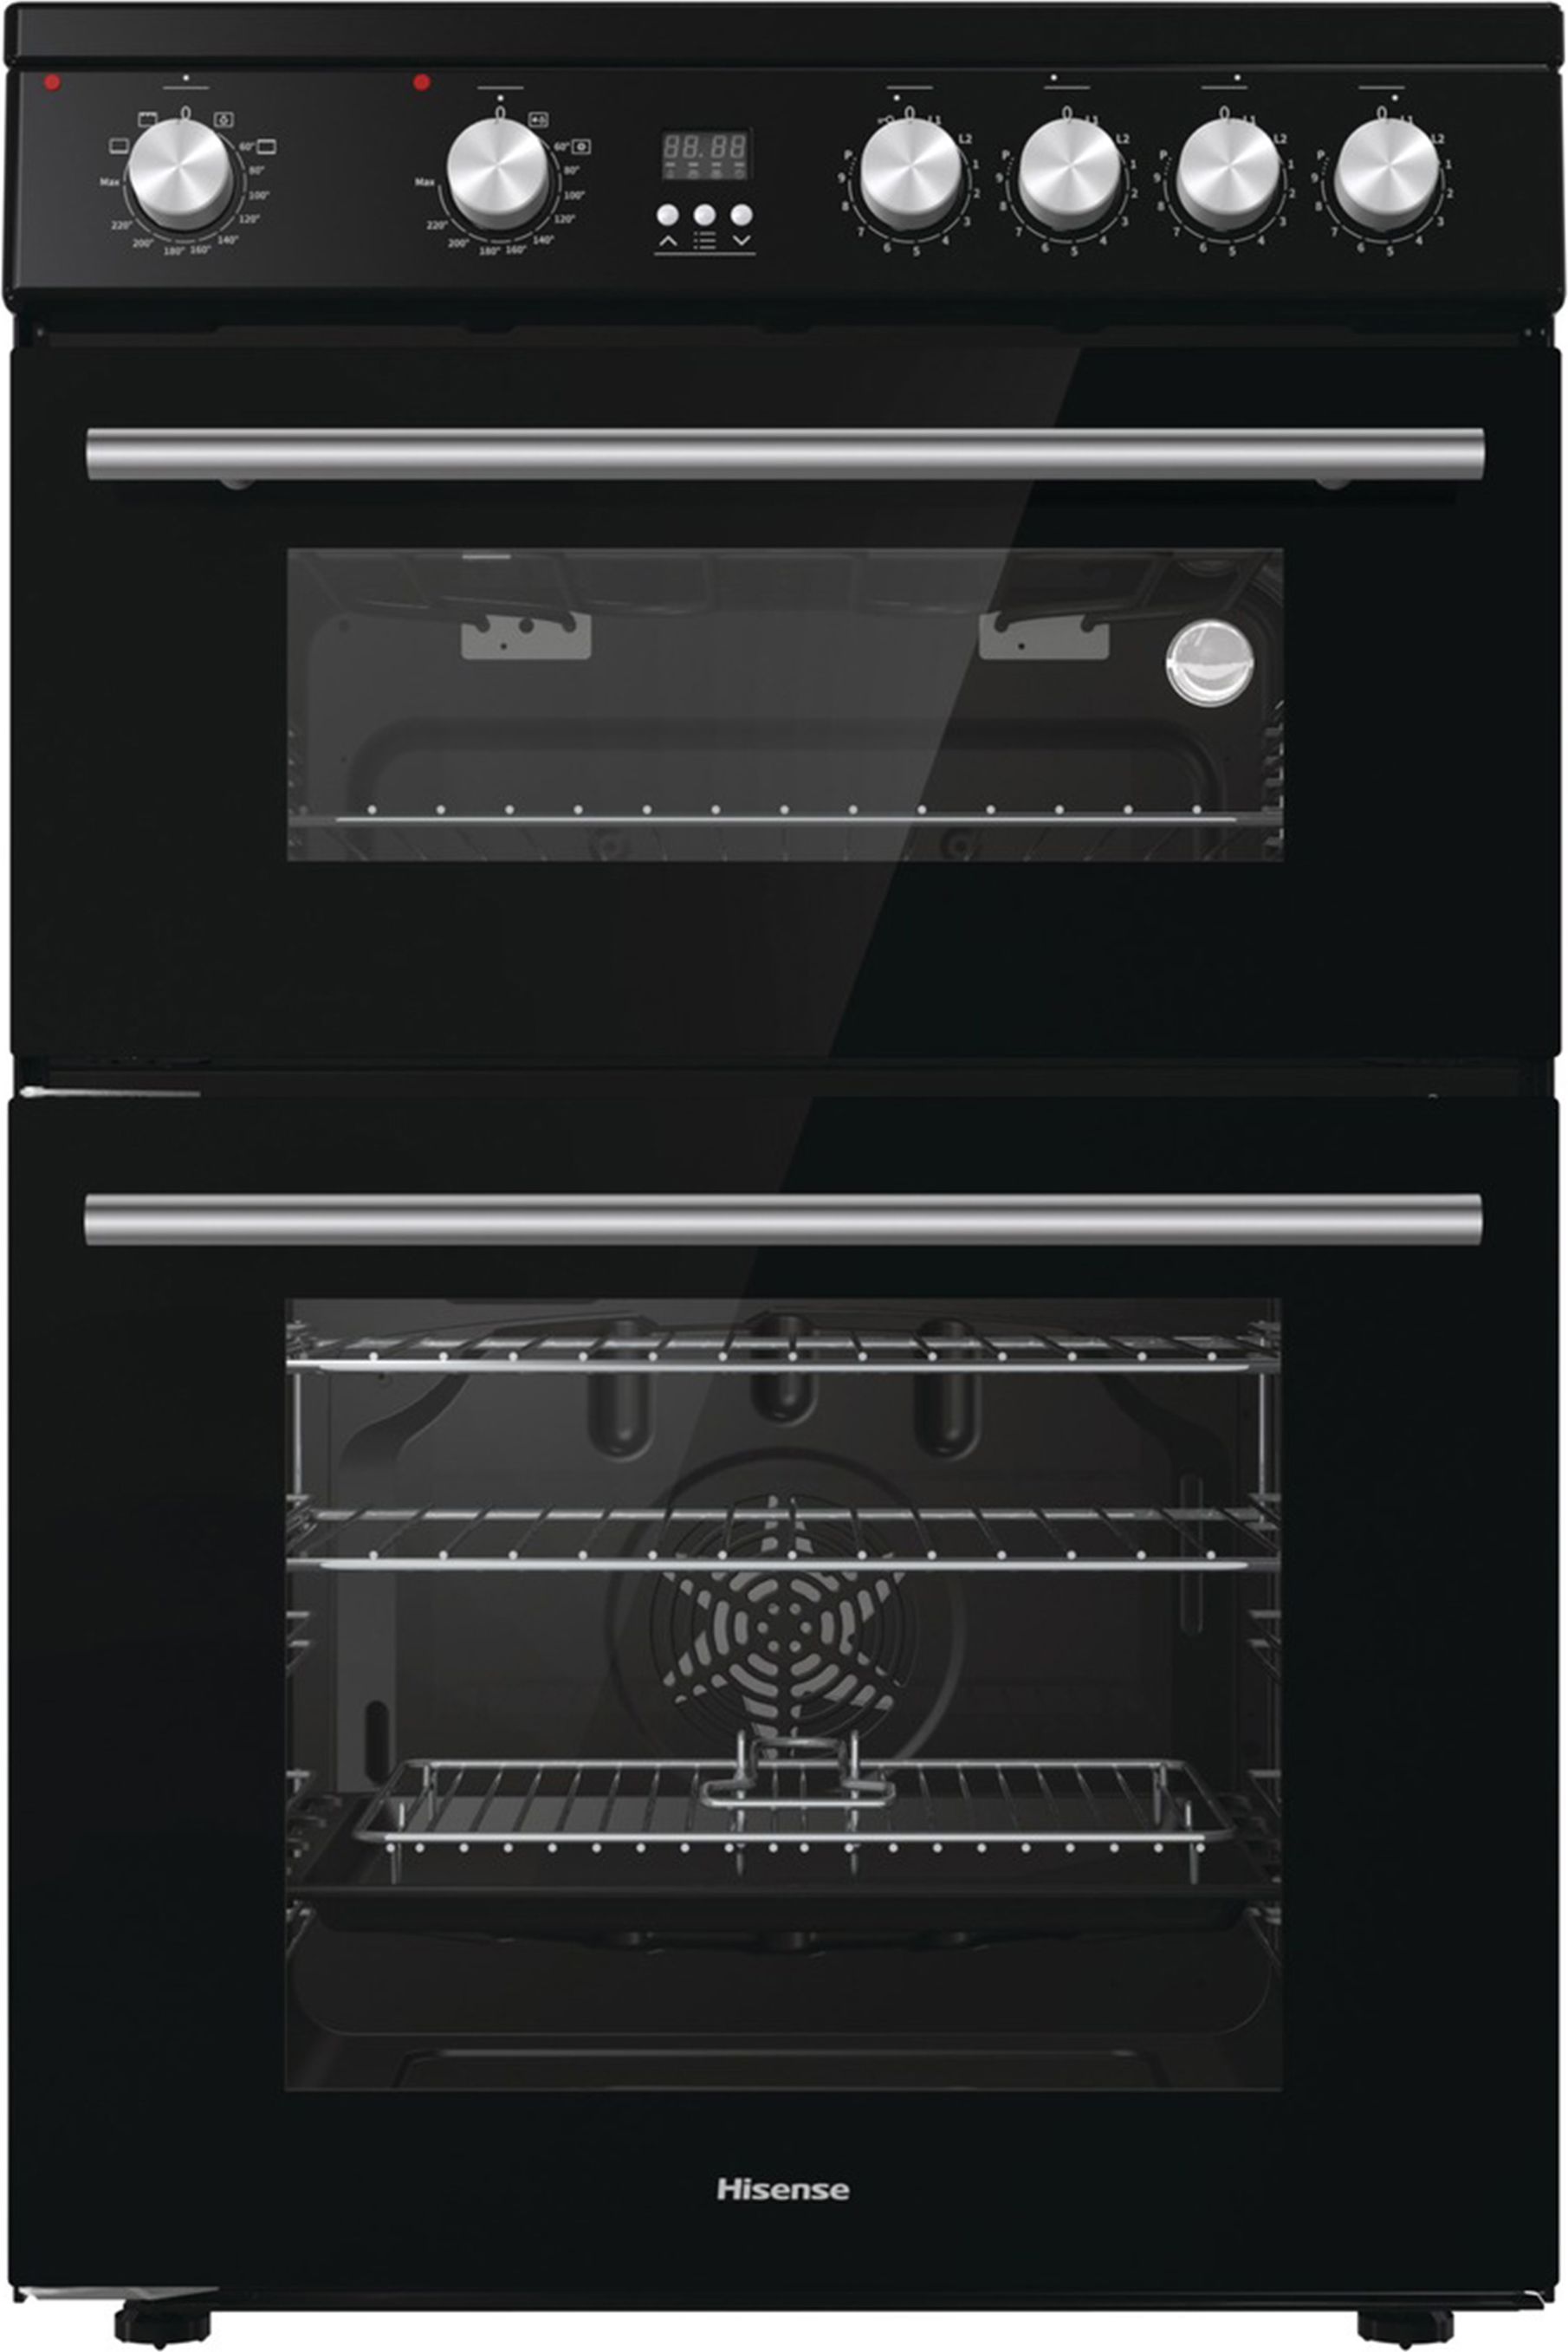 Hisense HDE3211BIBUK 60cm Electric Cooker with Induction Hob - Black - A+/A Rated, Black